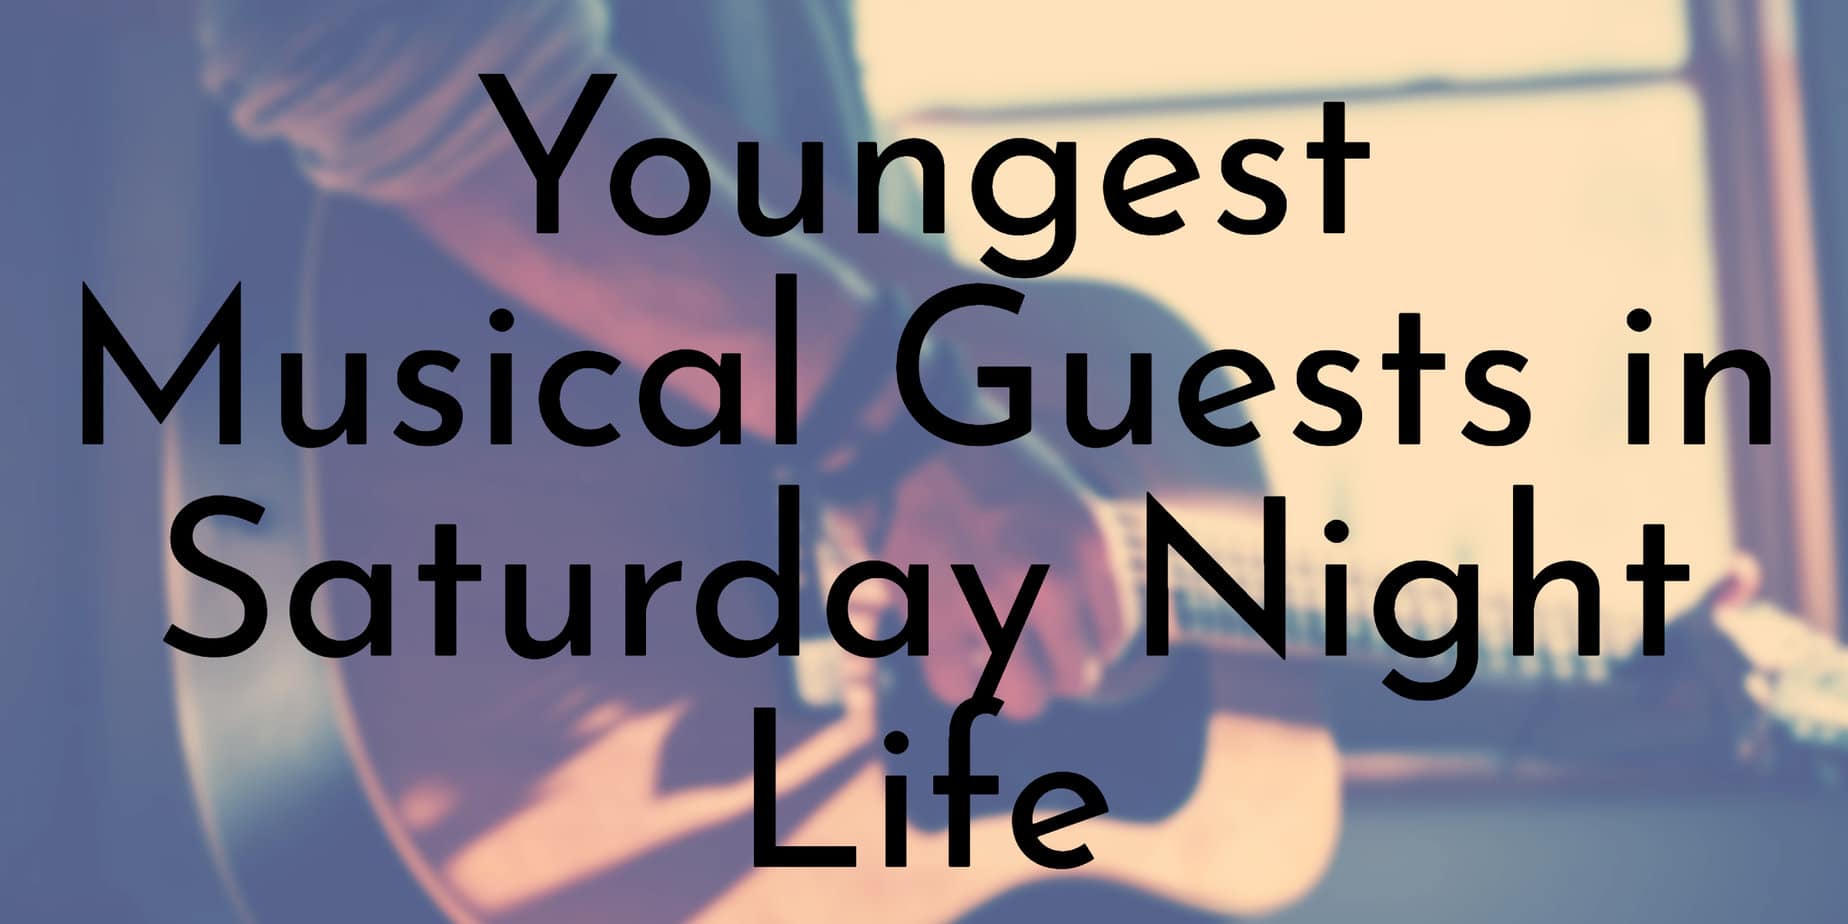 Youngest Musical Guests in Saturday Night Life